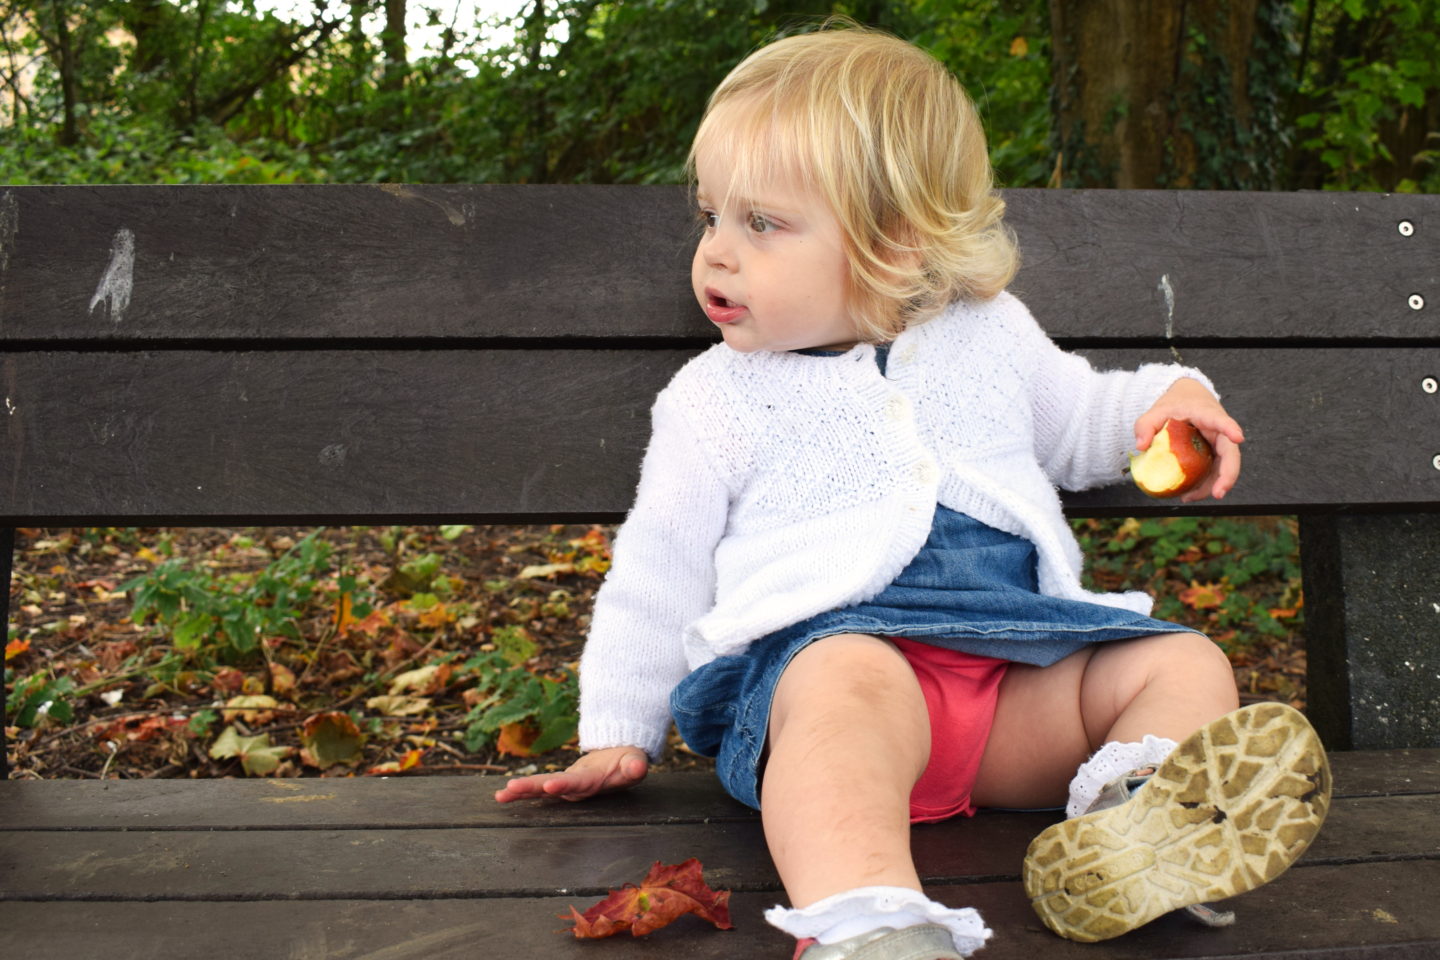 18 month old girl, sitting on bench, eating apple